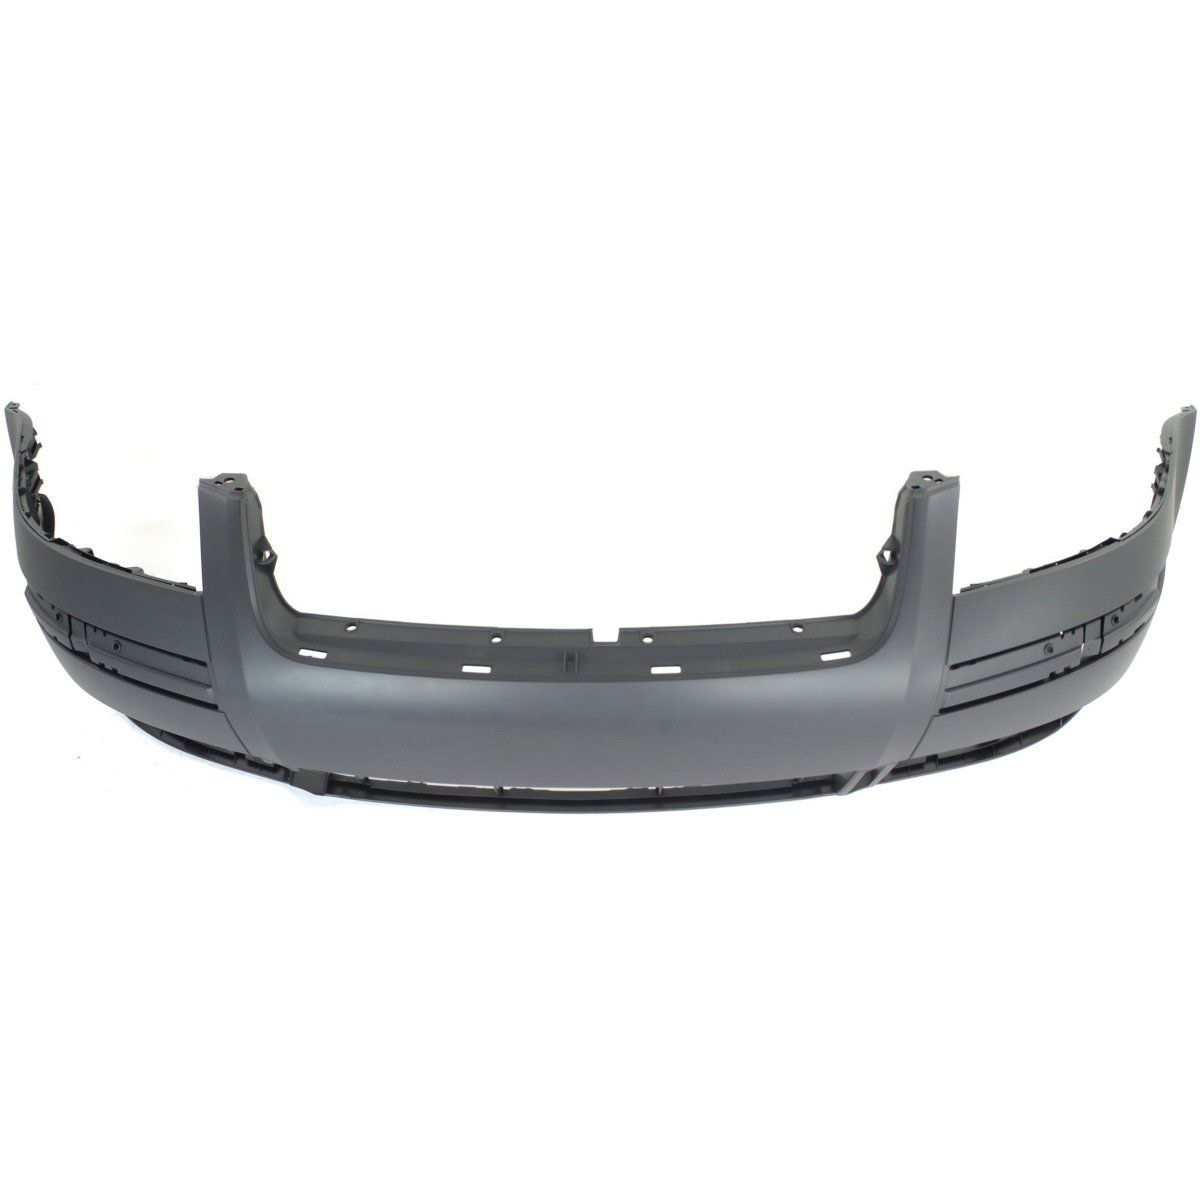 2001-2005 VOLKSWAGEN PASSAT Front Bumper Cover late design  w/o headlamp washer Painted to Match